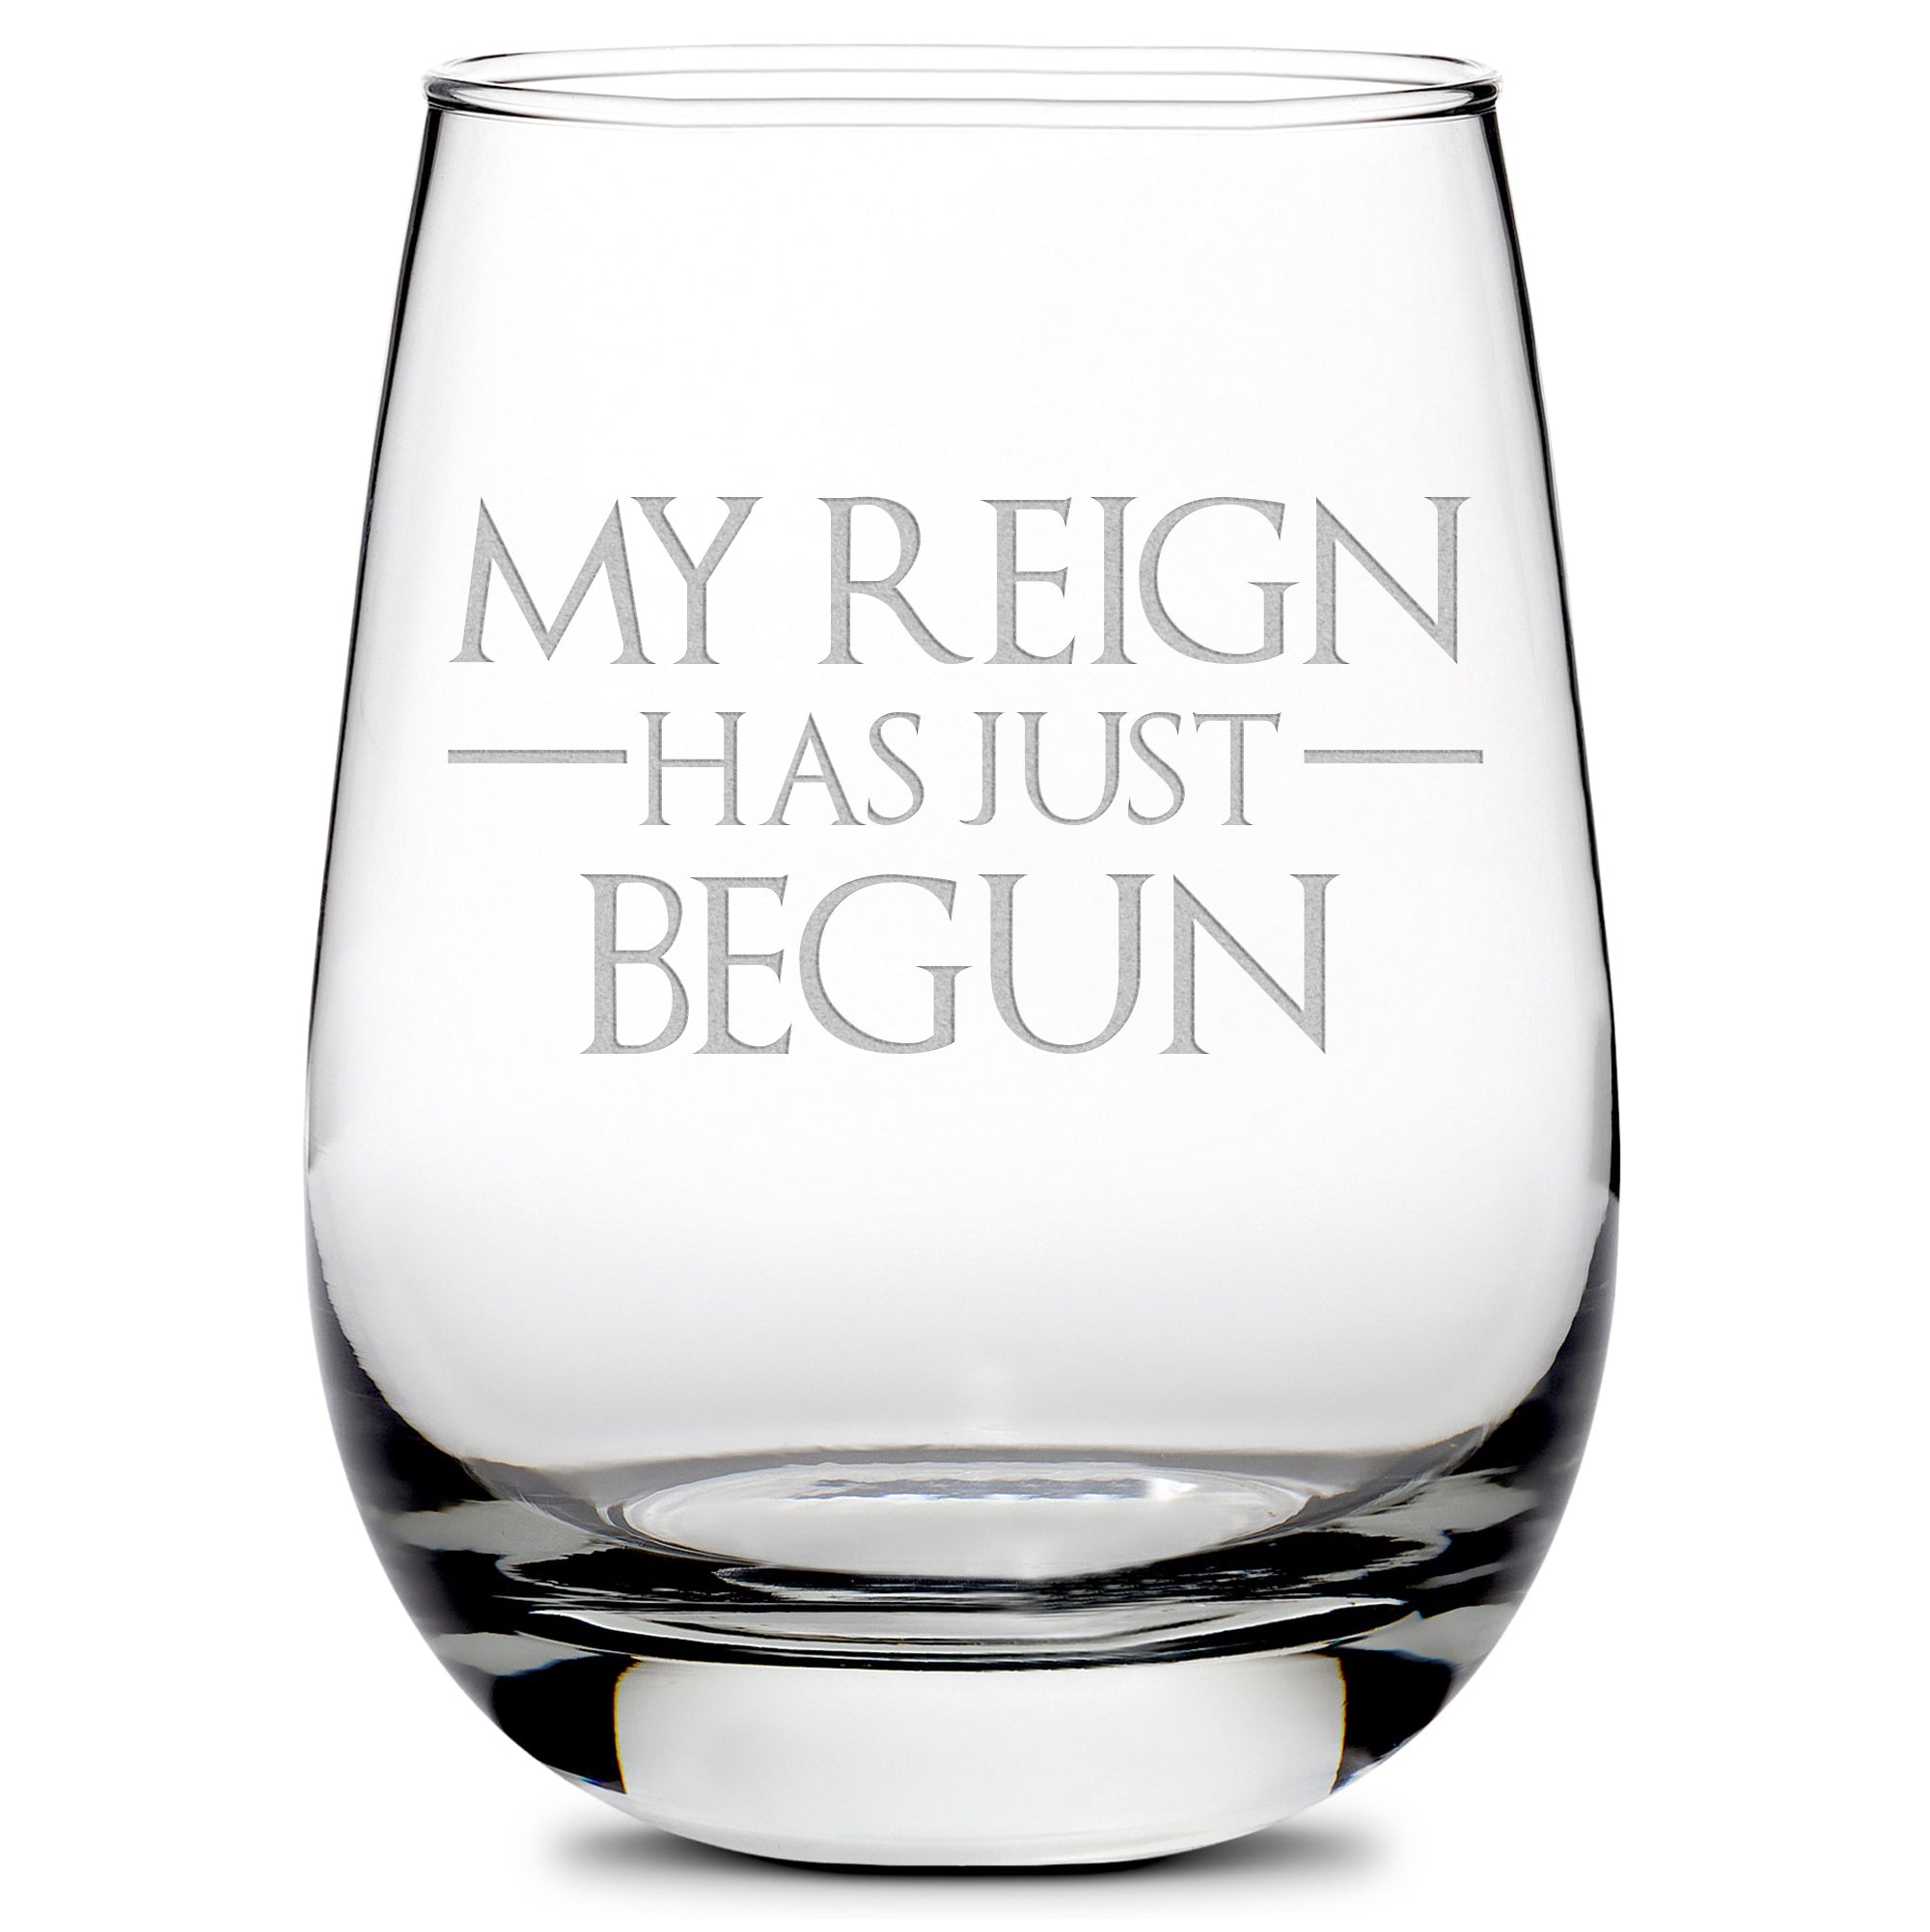 Premium Wine Glass, Game of Thrones, My Reign Has Just Begun, 16oz, Laser Etched or Hand Etched